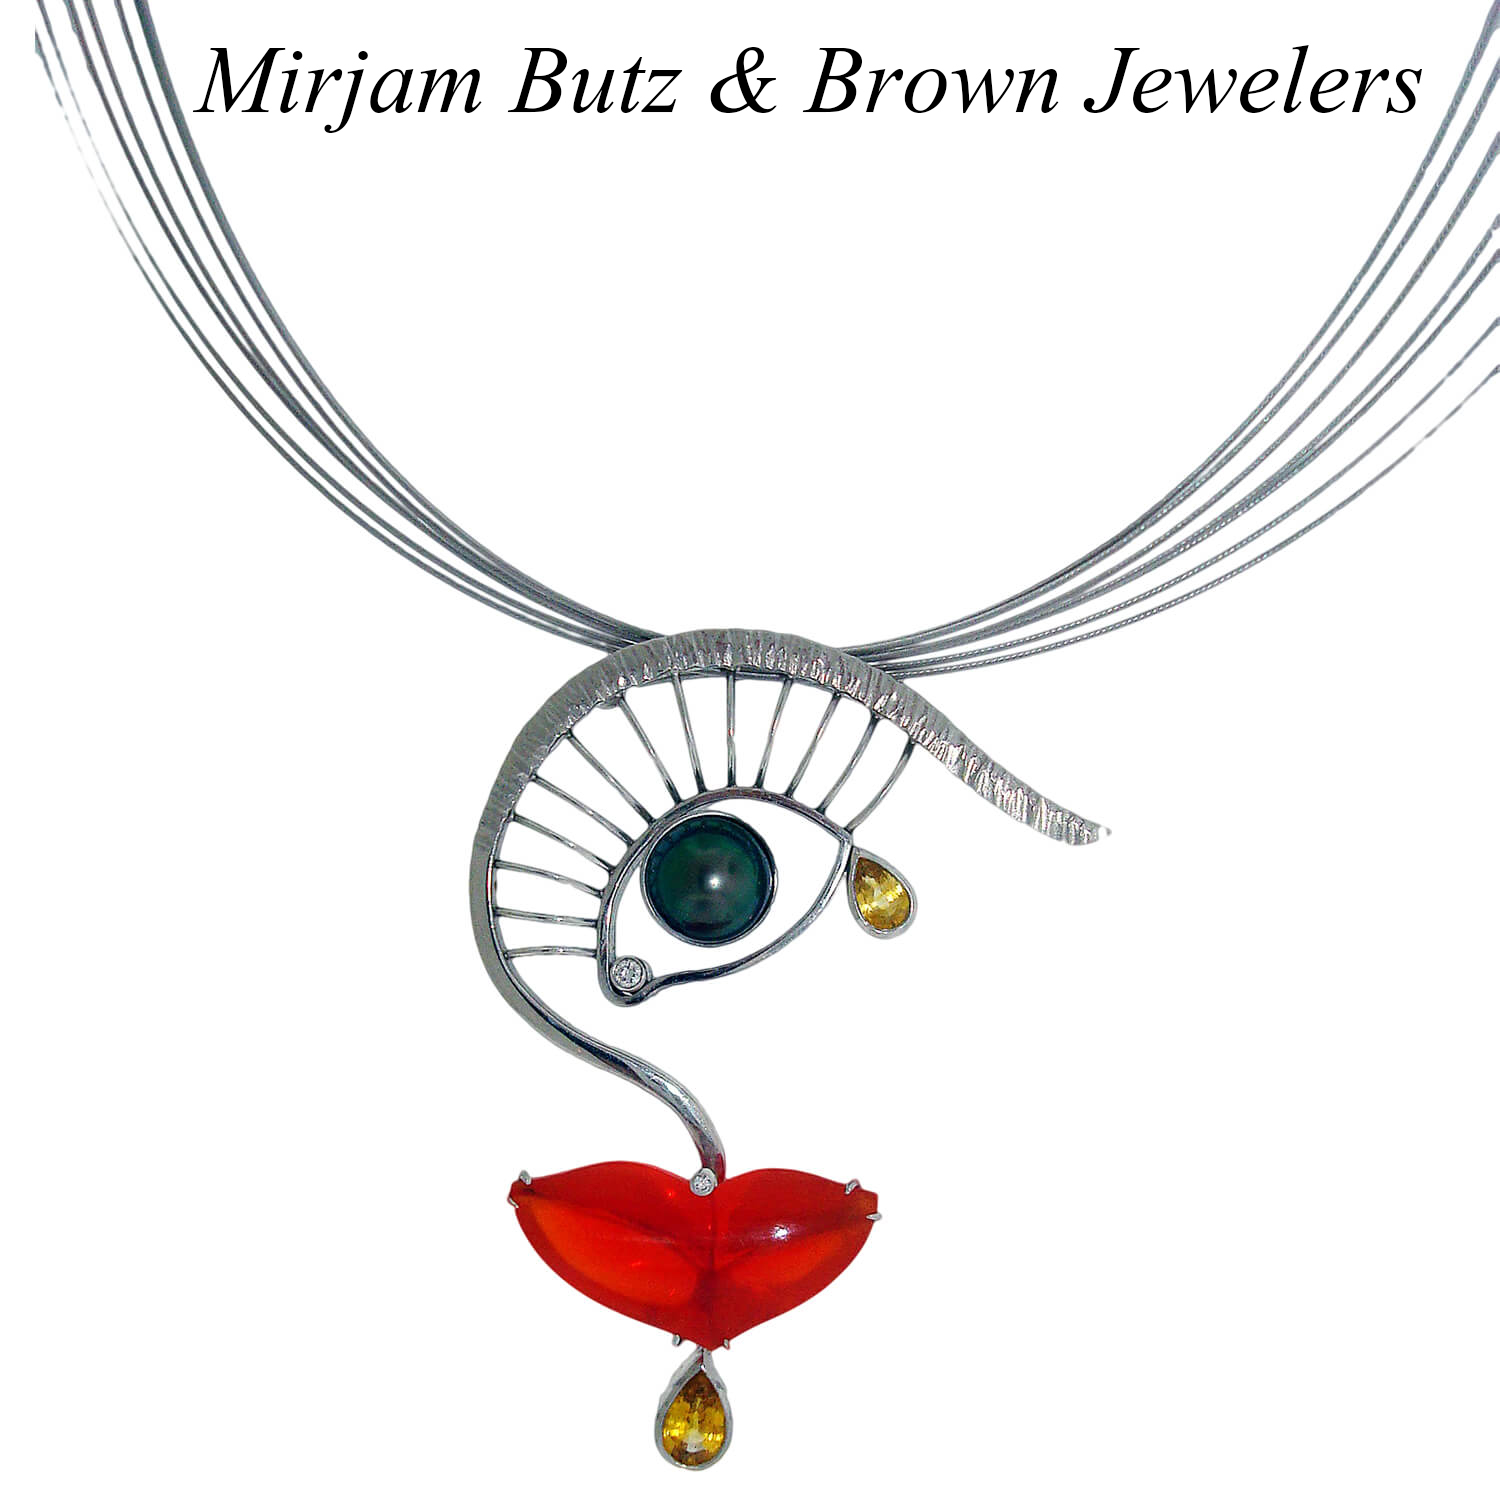 Mirjam butz and brown jewelers mexican fire opal pendant is available at diamonds on the rock